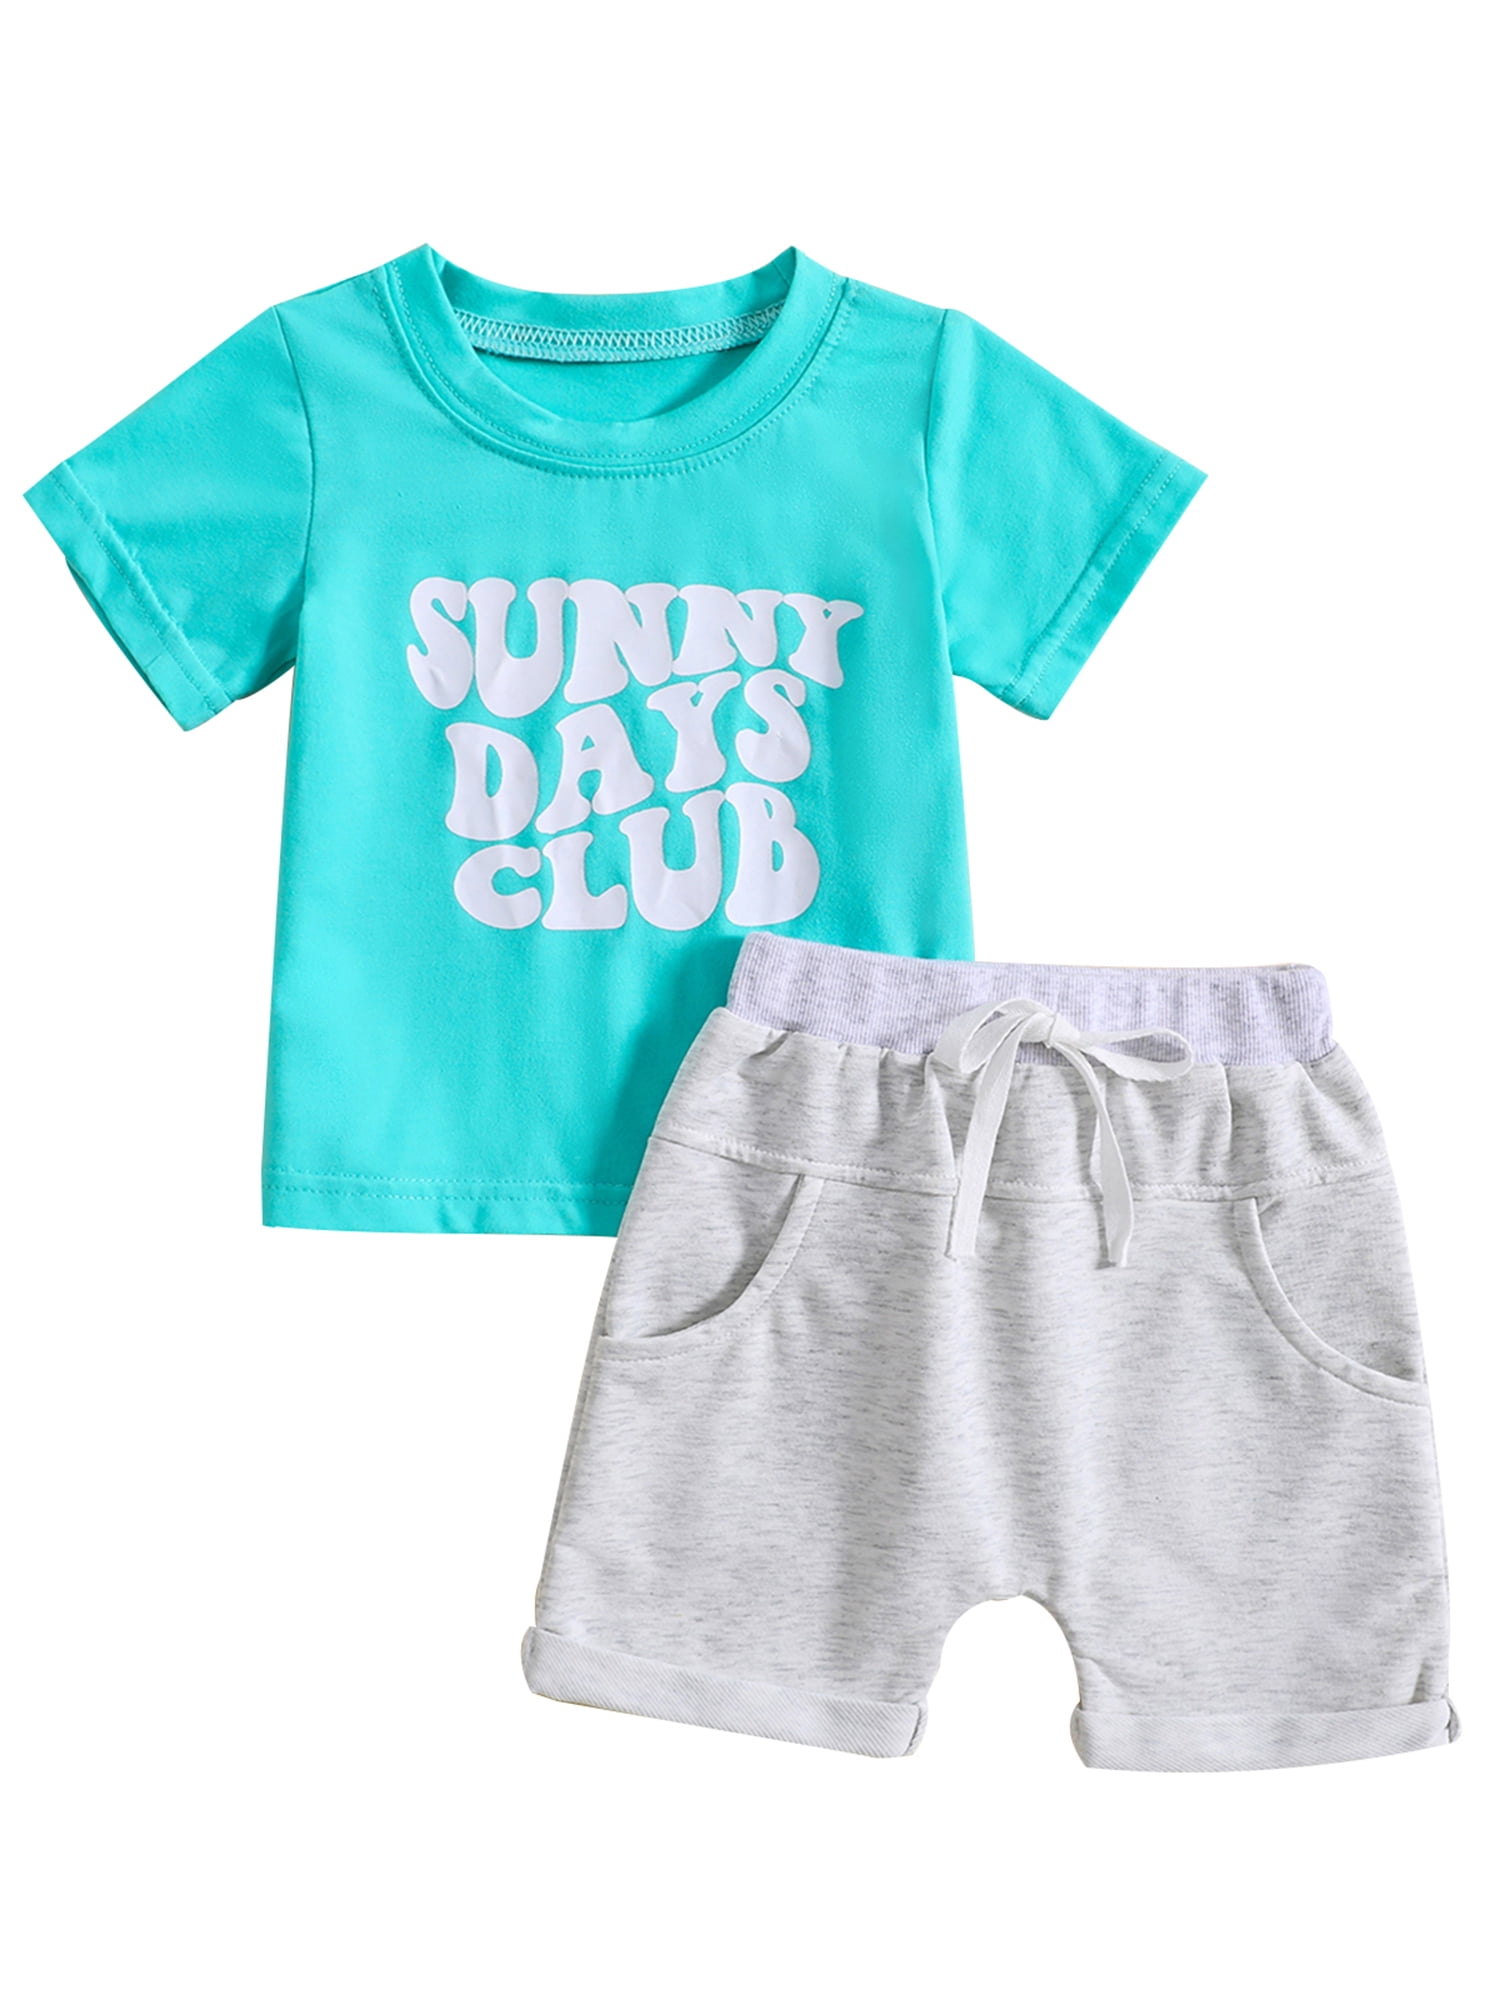 BABAMOON Infant Baby Boys Girls Summer Outfits Short Sleeve Letter T ...